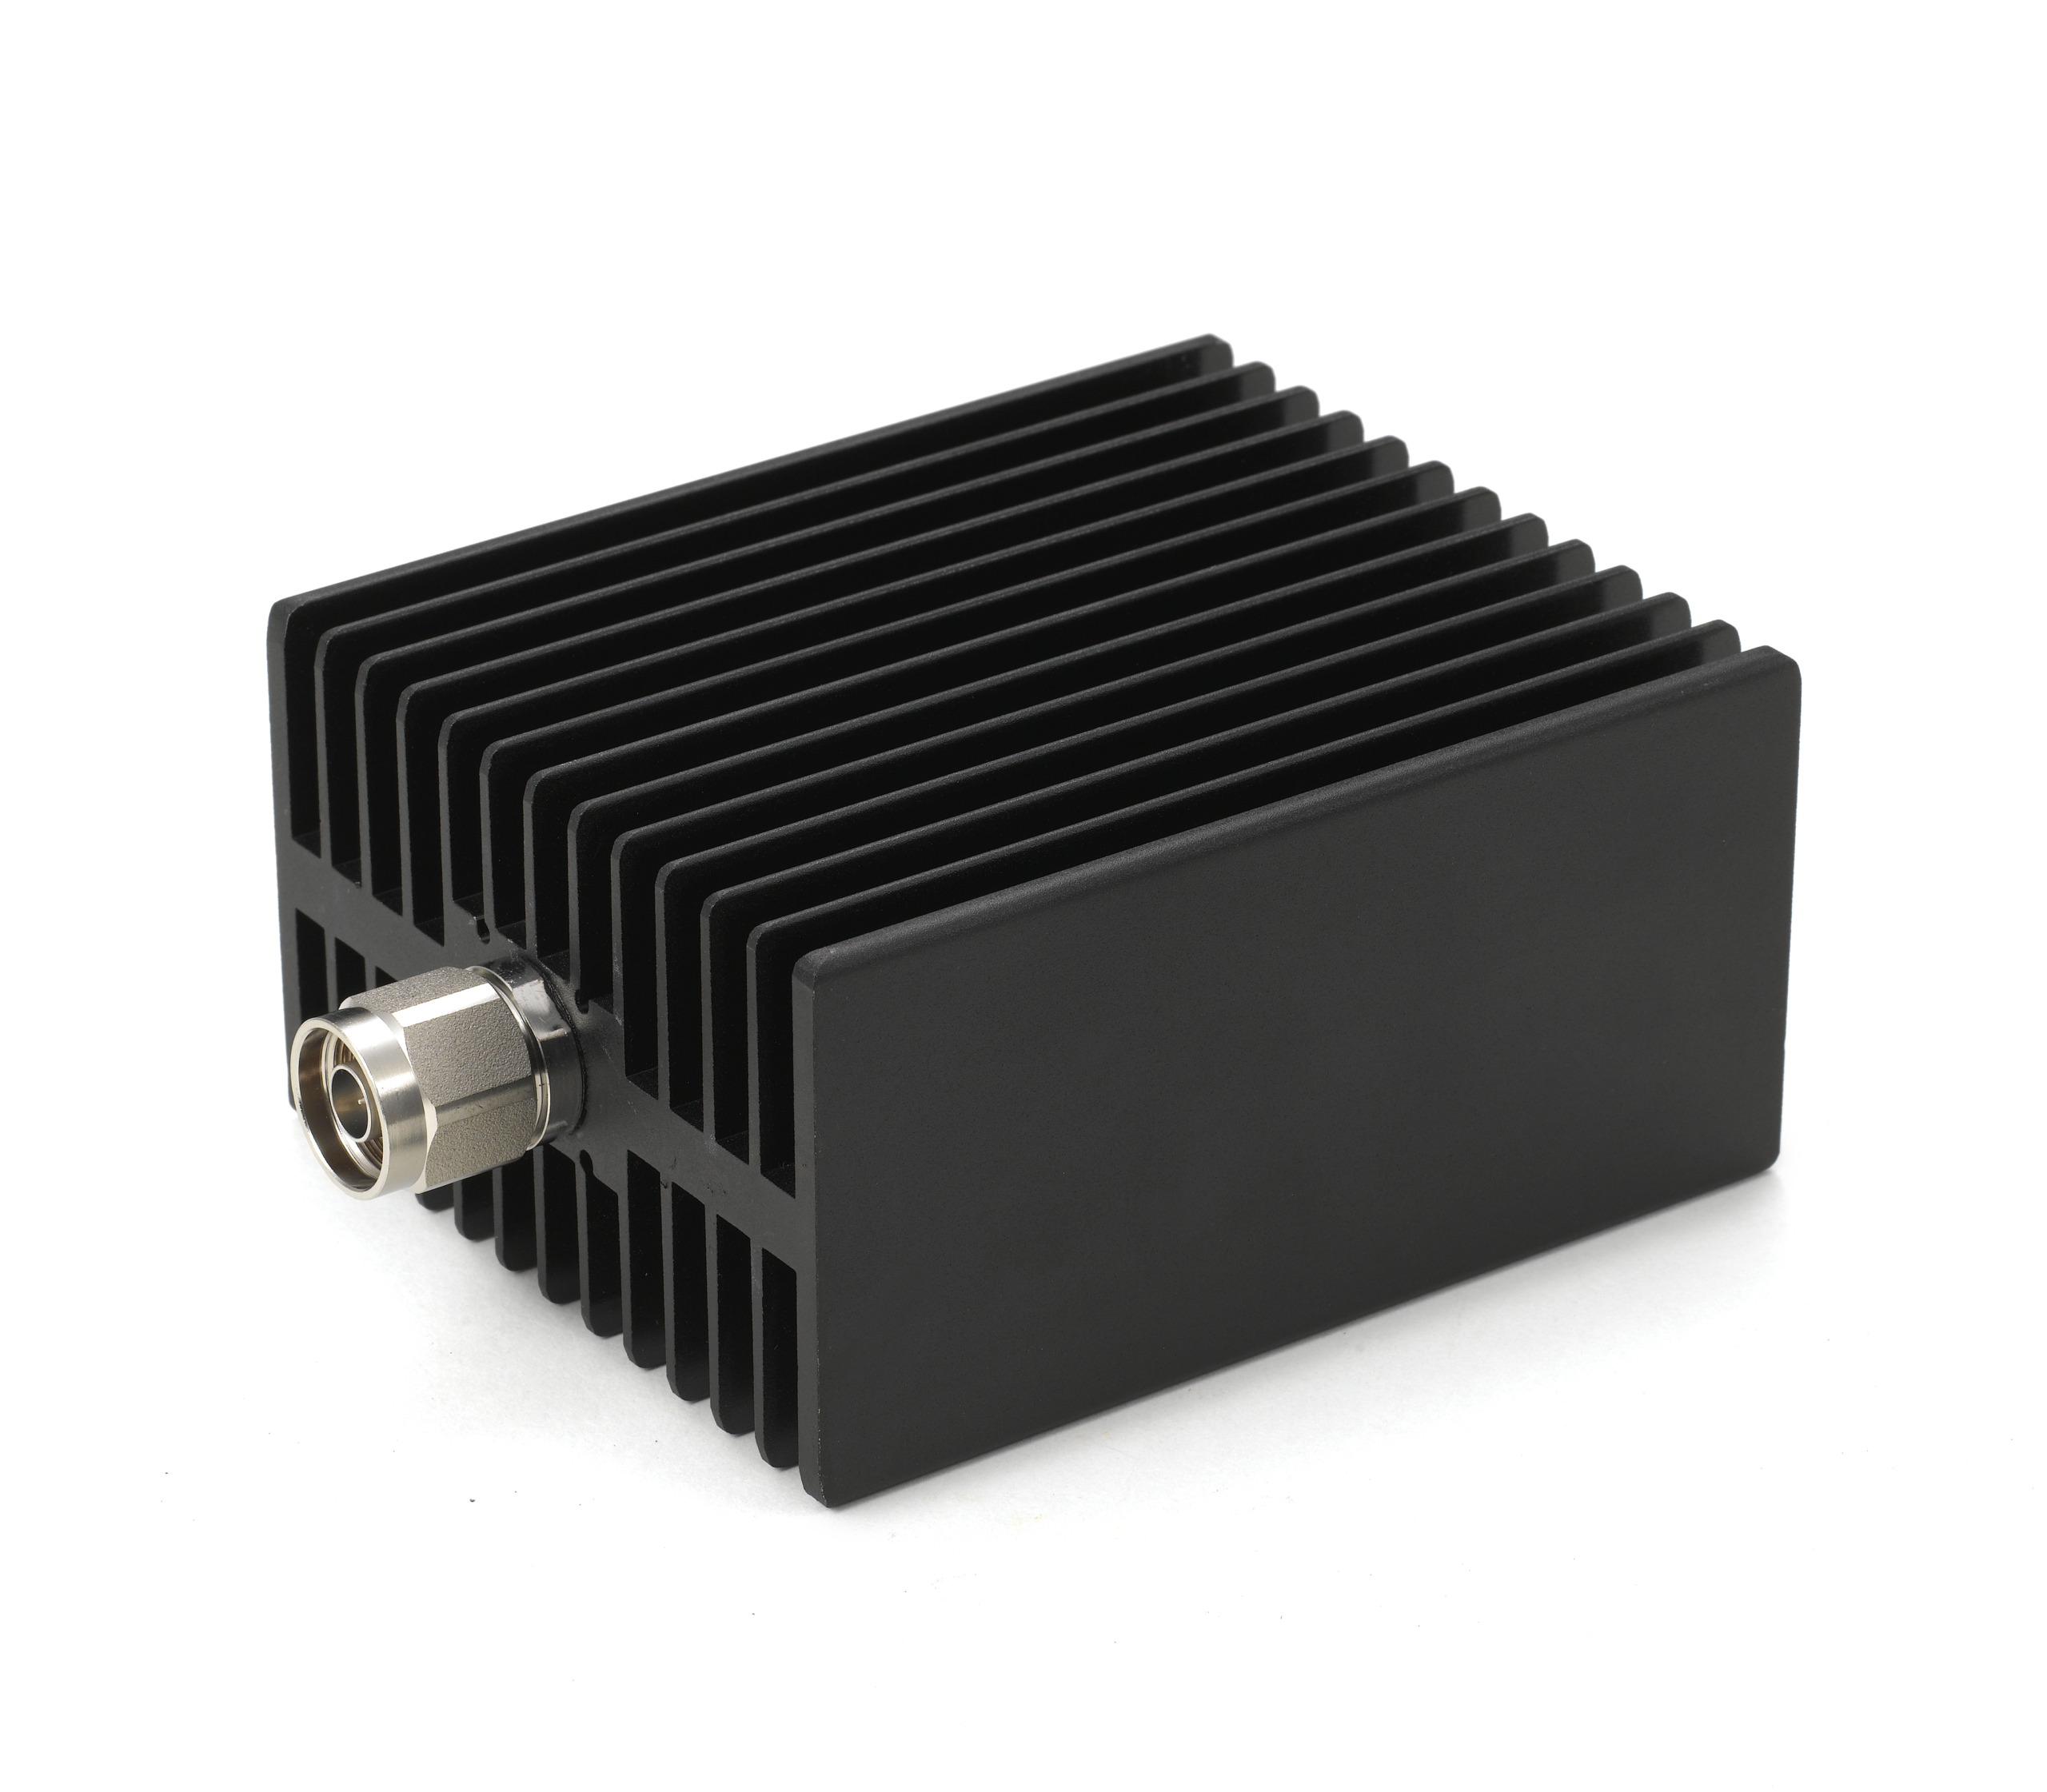 Cost-Effective Series RF Attenuators / Dummy Loads for 5G Launched！